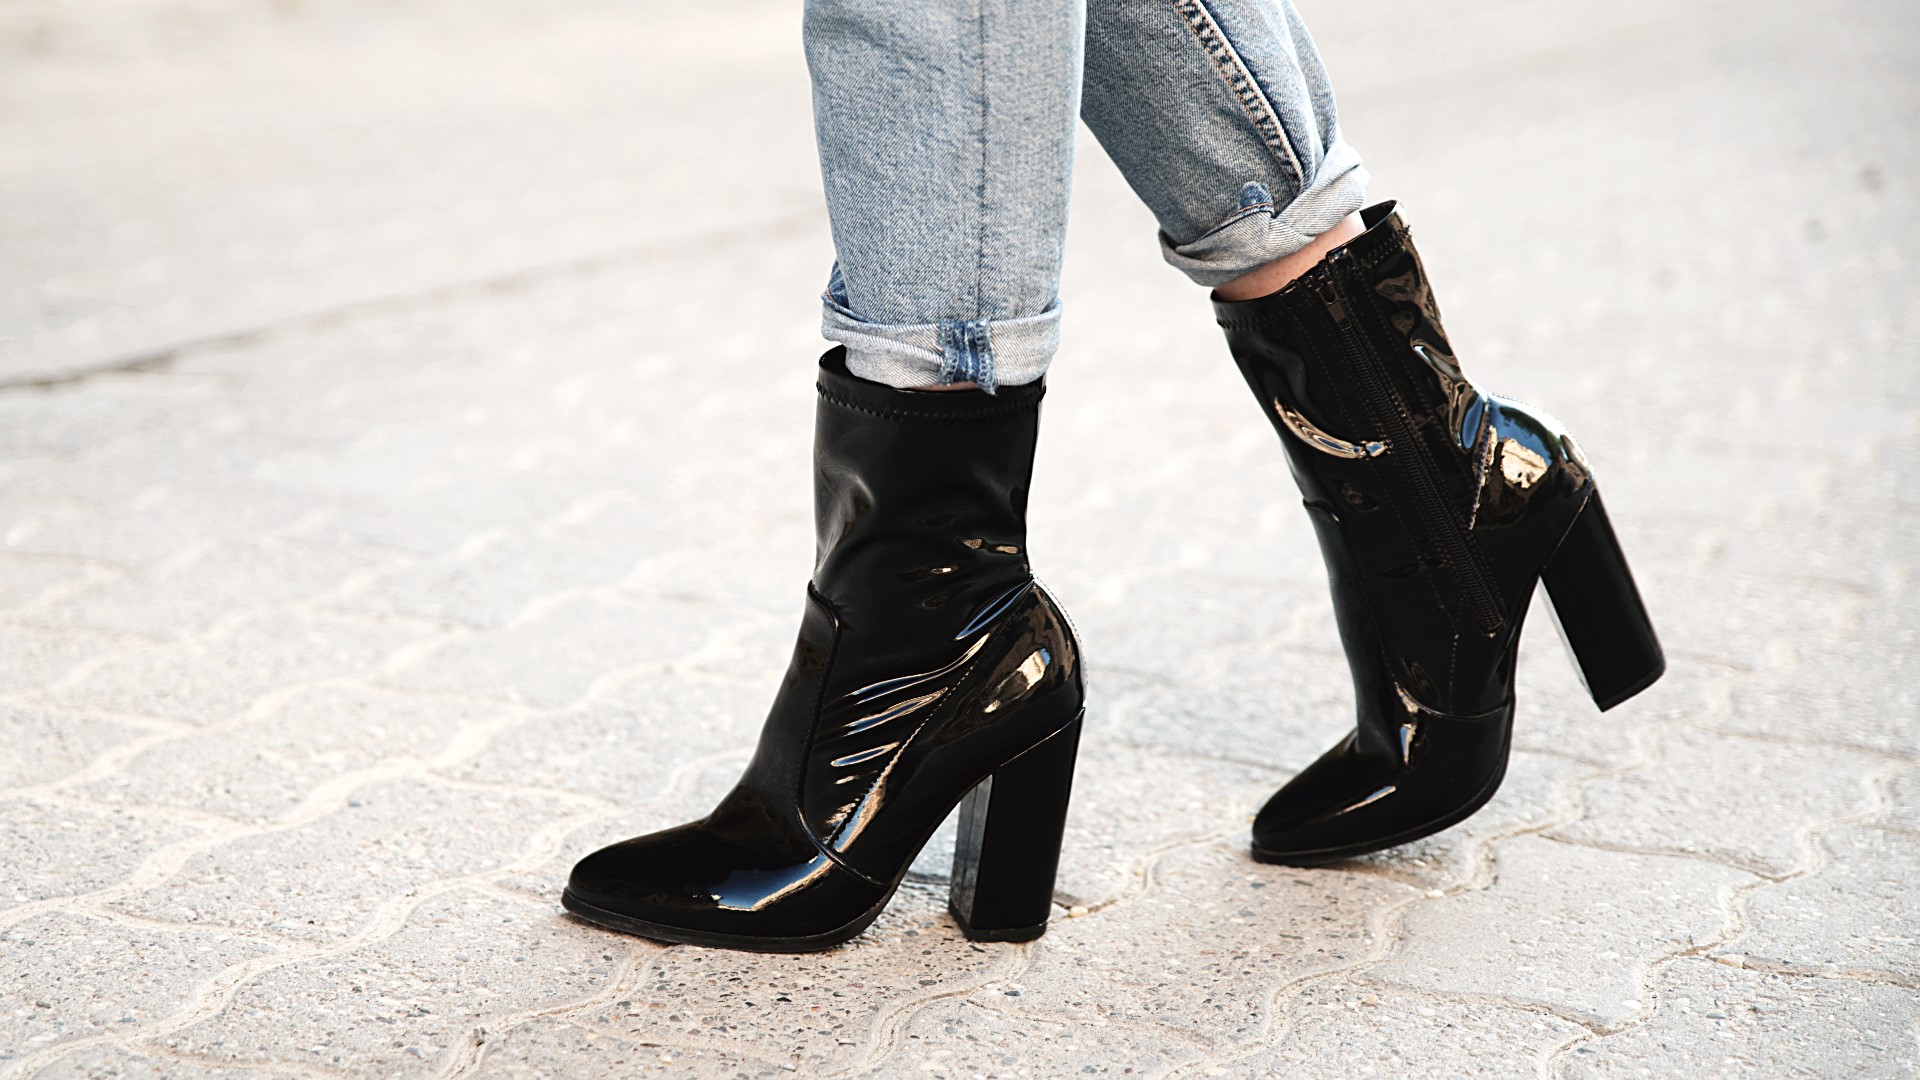 Professional Stylist Michelle Krick has tips for how to wear every style of boot.